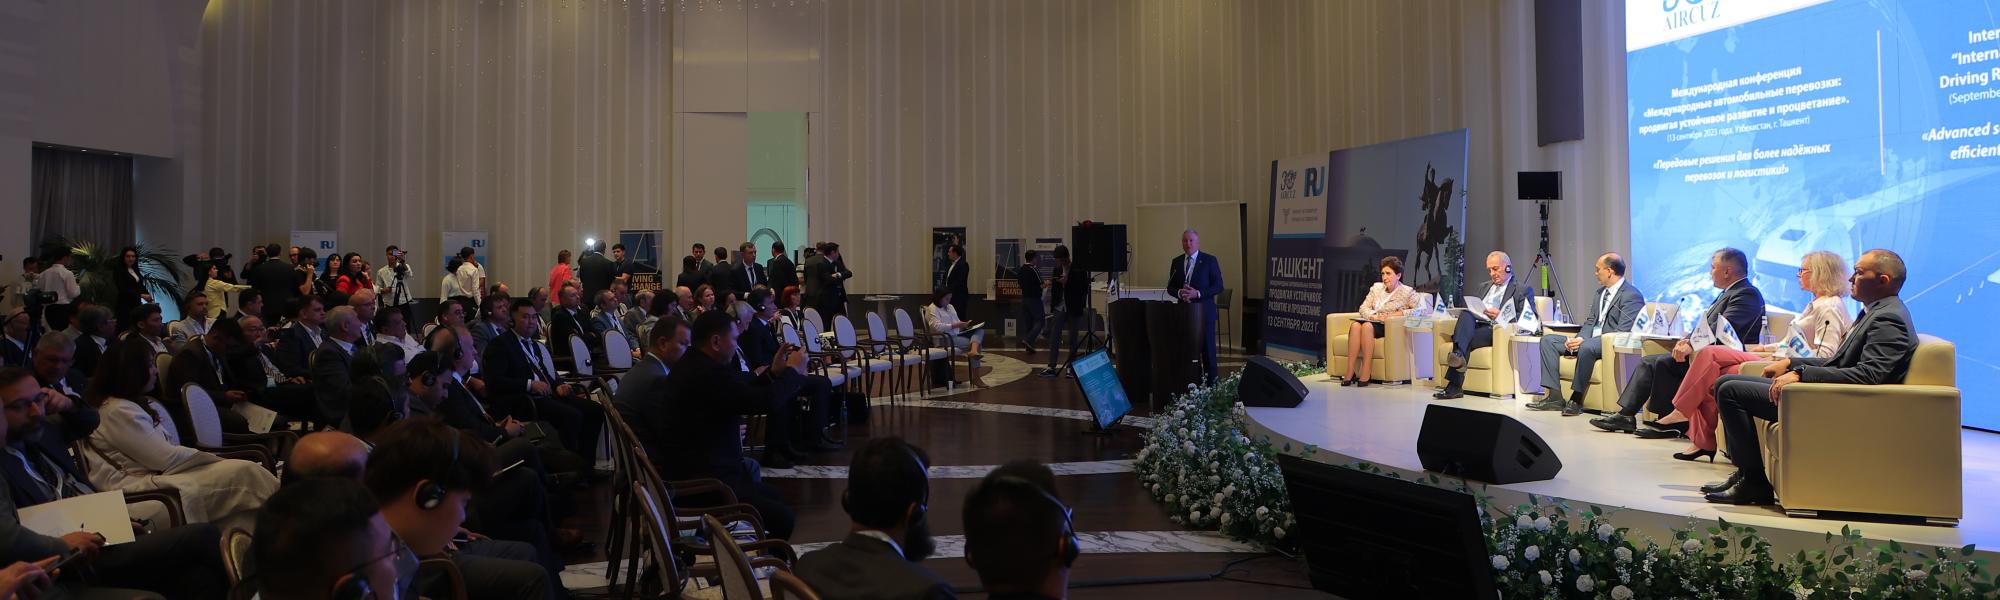 Driving resilience and prosperity in focus at Tashkent conference